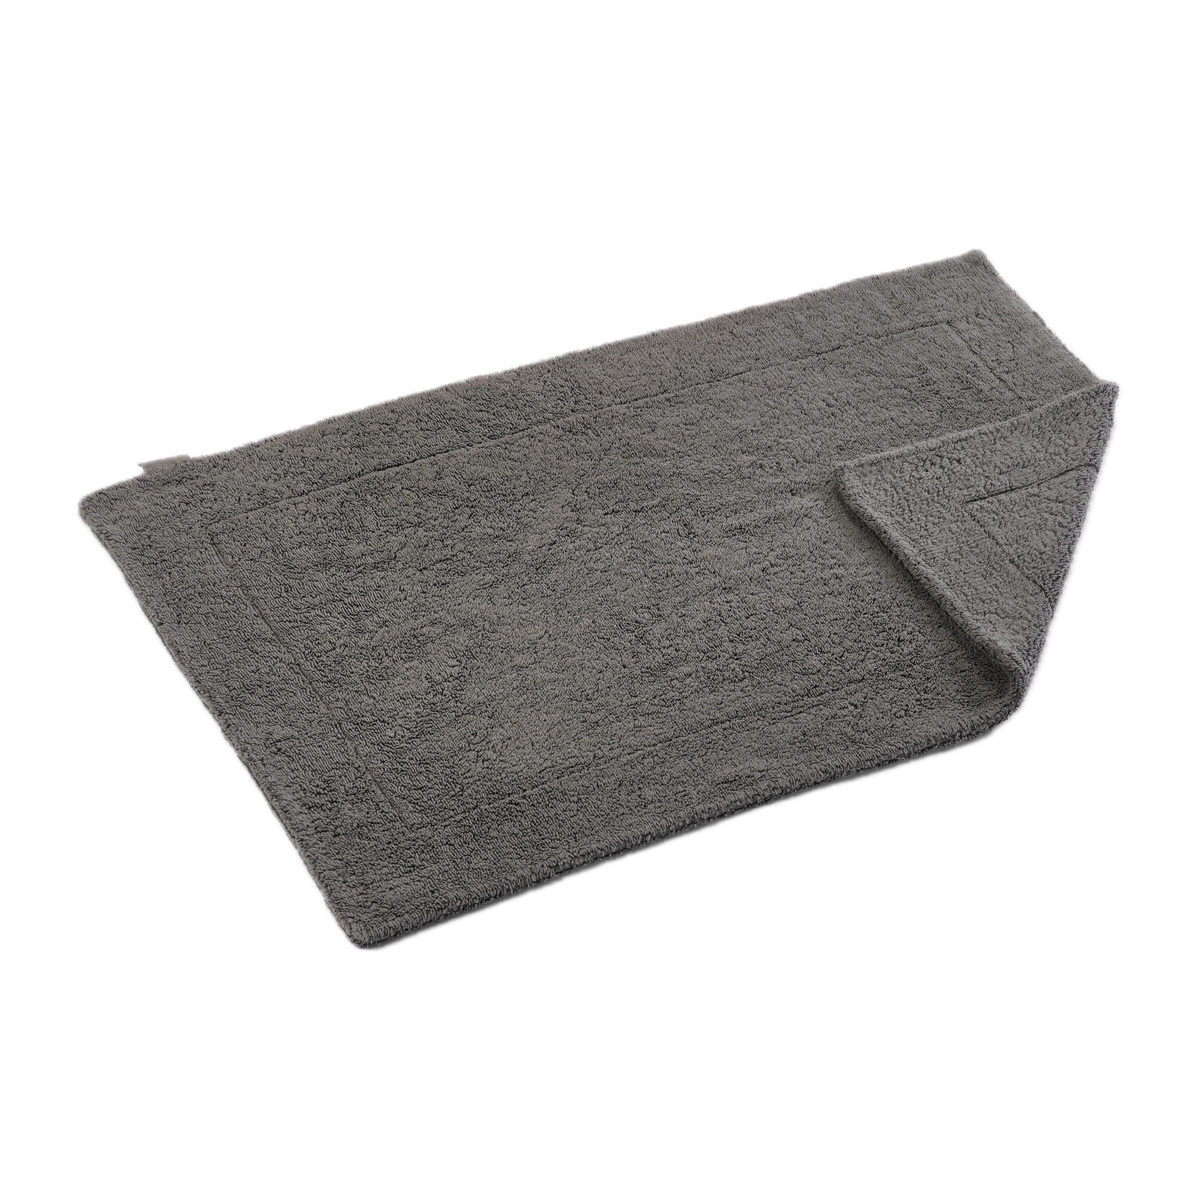 Slanted Image of Abyss Double Bath Tub Mat in Volcan (997) Color with Fold